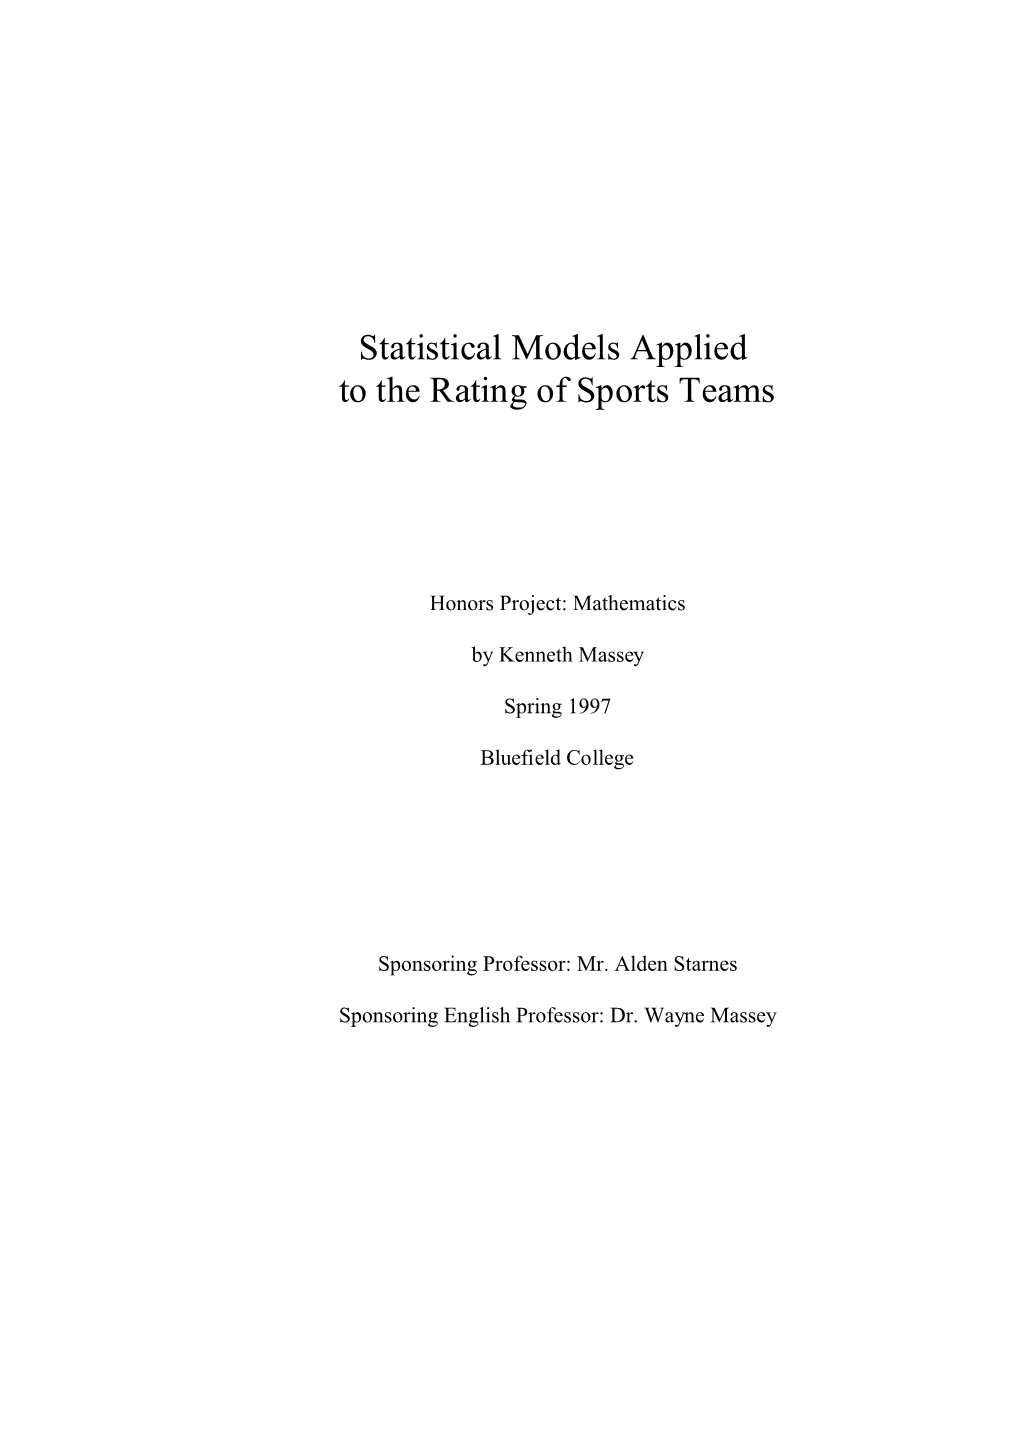 Statistical Models Applied to the Rating of Sports Teams